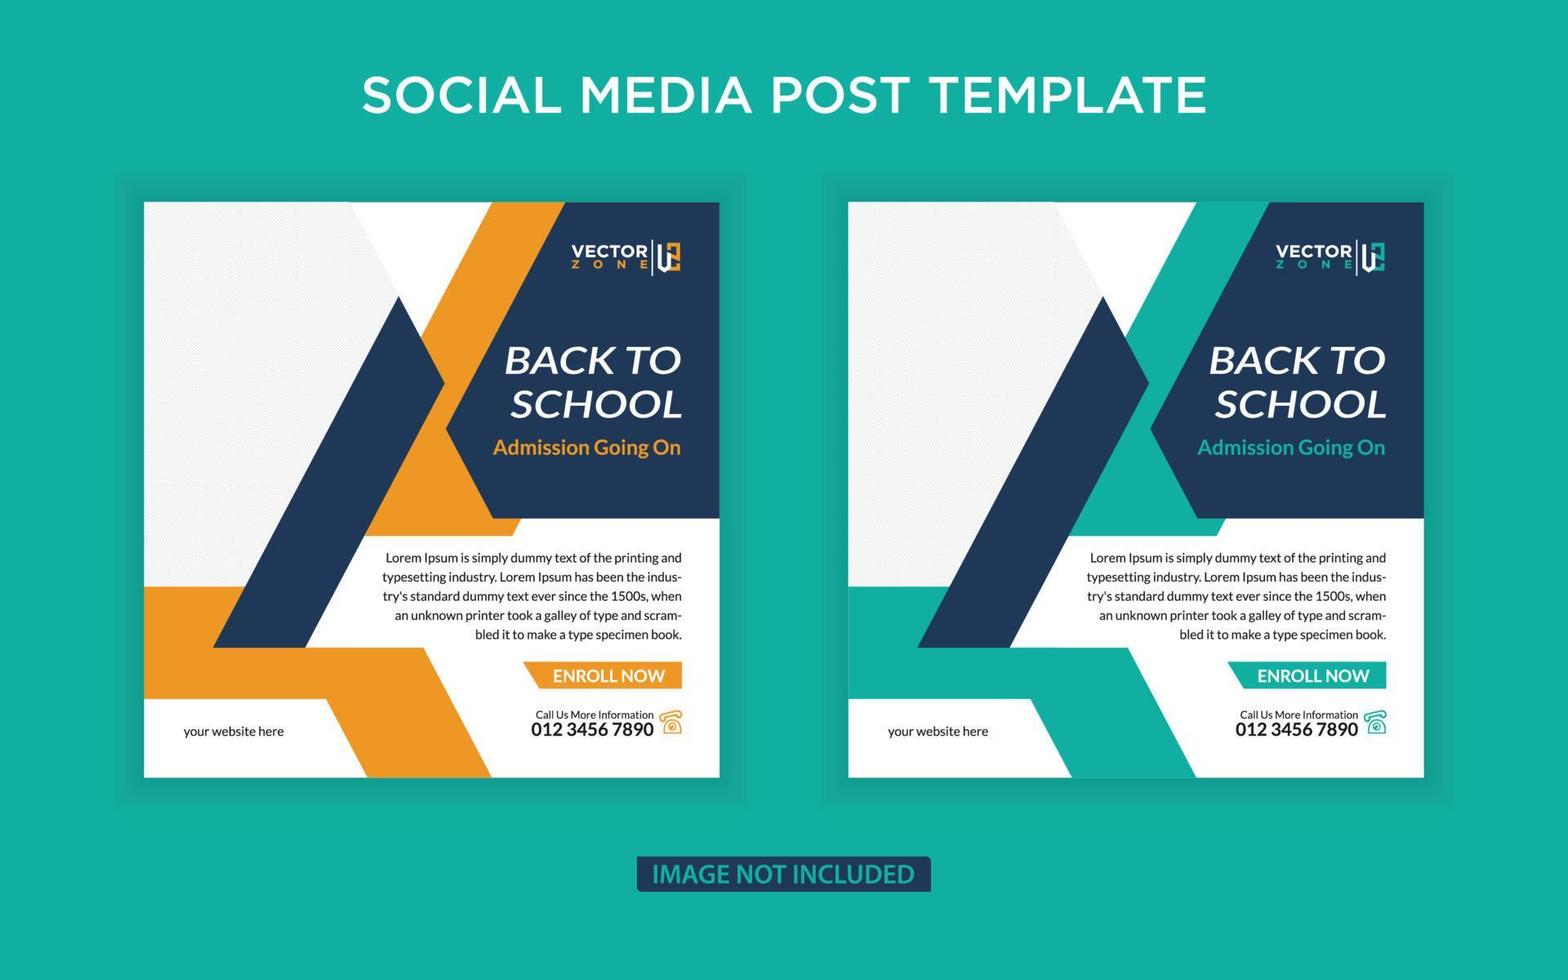 Back to school admission social media post vector